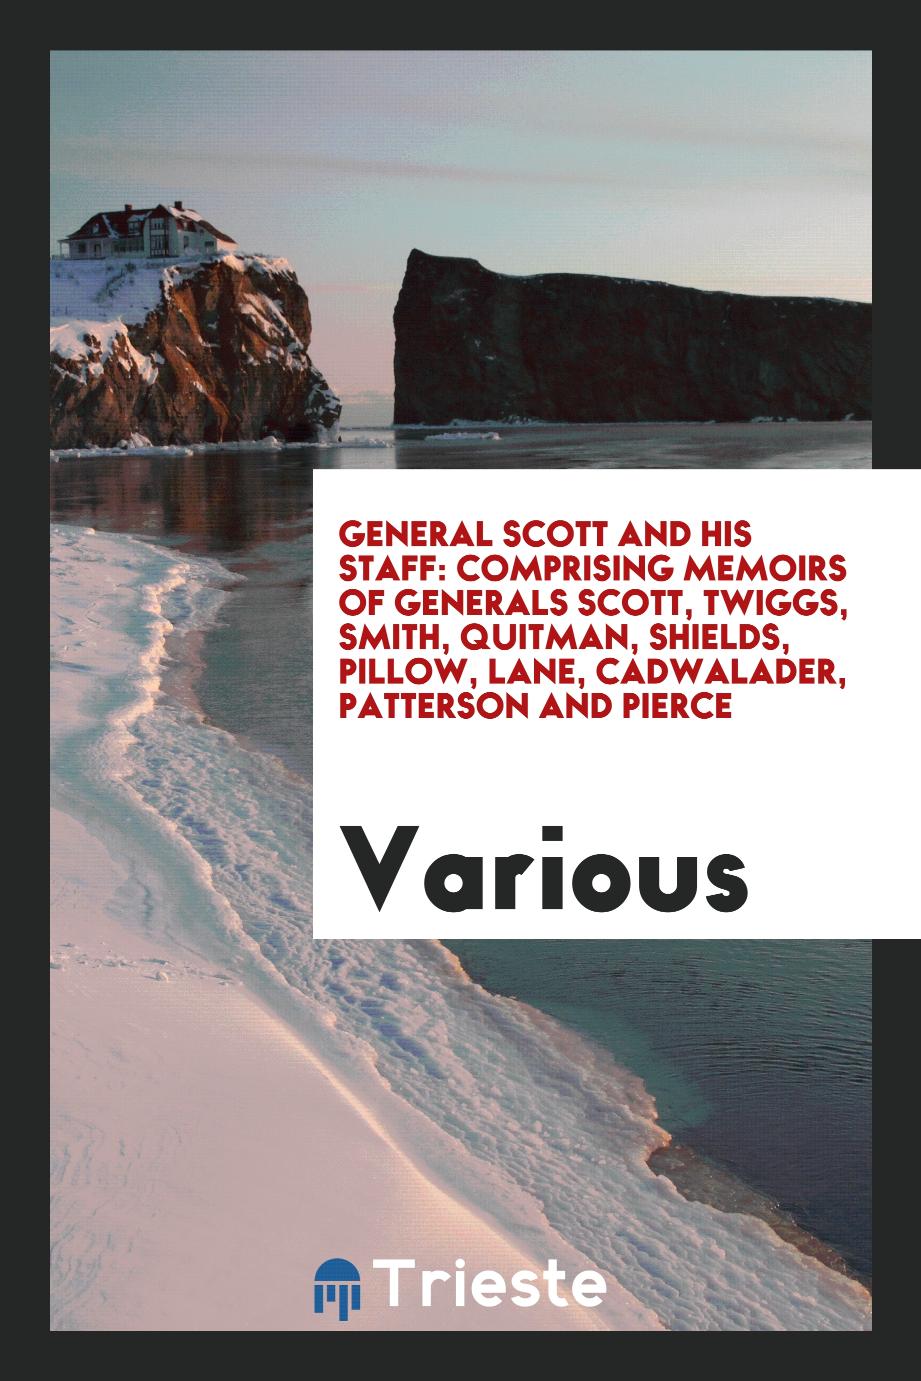 General Scott and his staff: comprising memoirs of Generals Scott, Twiggs, Smith, Quitman, Shields, Pillow, Lane, Cadwalader, Patterson and Pierce